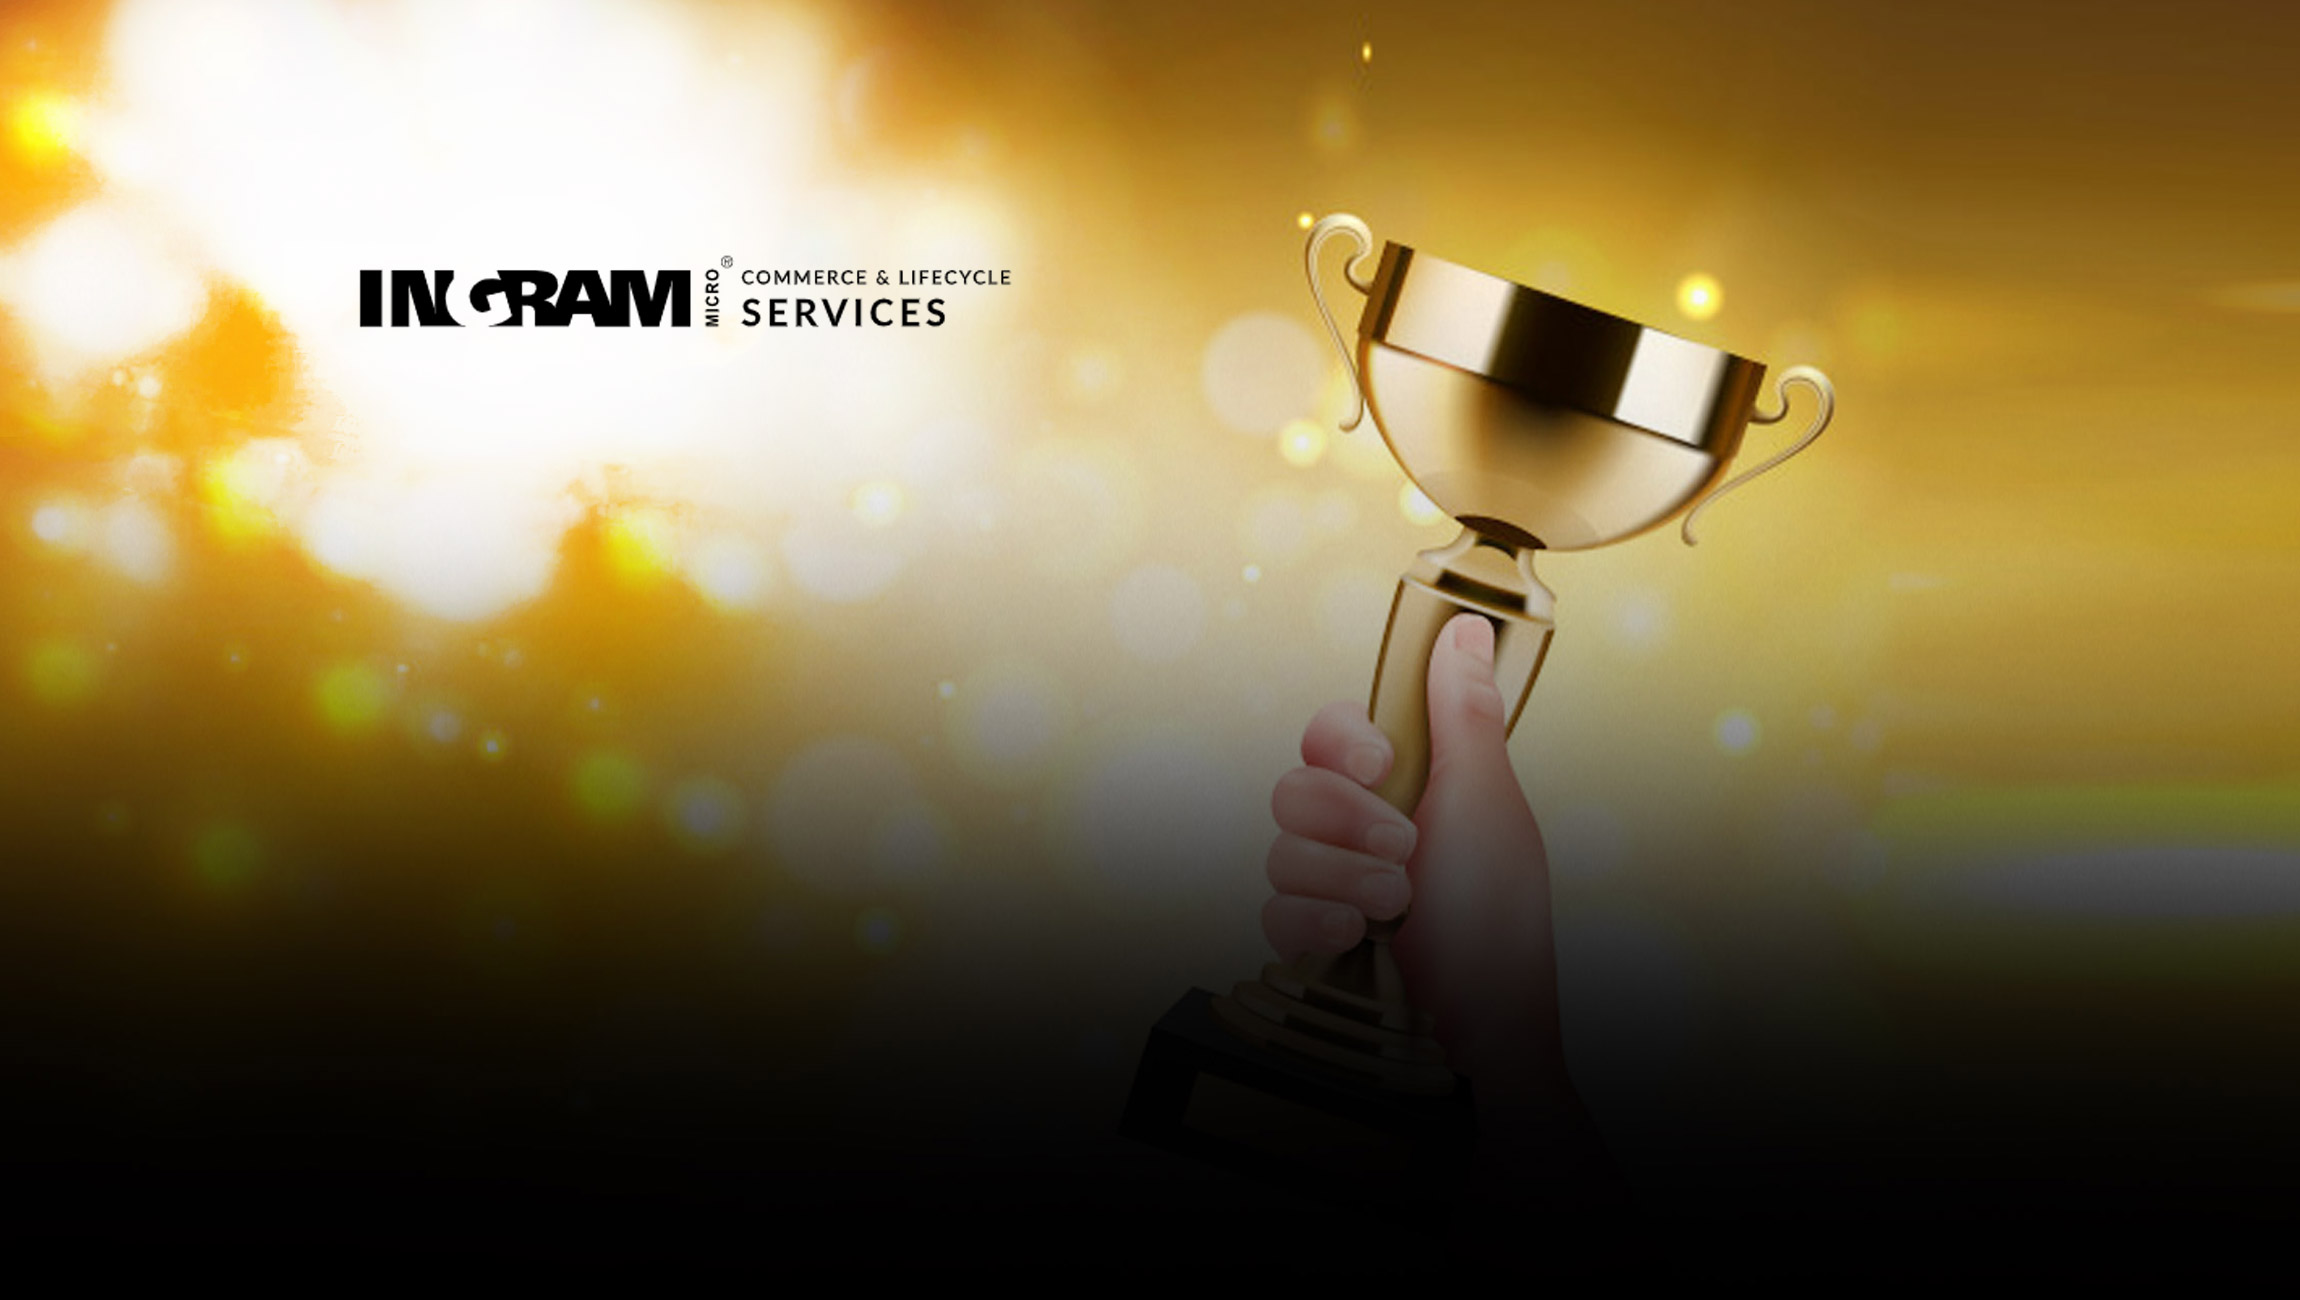 Ingram Micro Commerce & Lifecycle Services Executive Receives Supply Chain Award